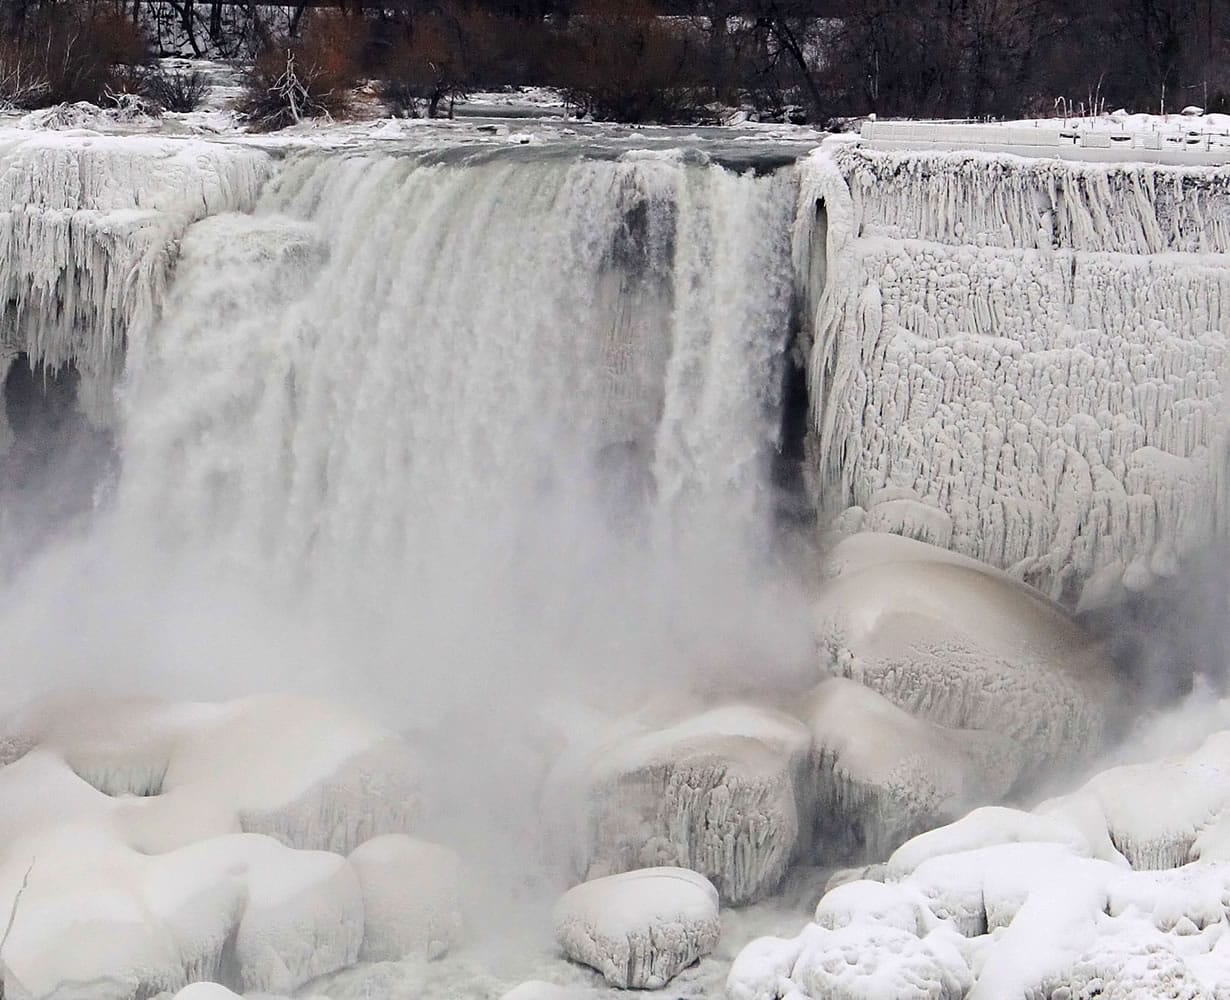 The United States side of Niagara Falls in New York has begun to thaw after the recent &quot;polar vortex&quot; that affected millions in the U.S. and Canada. Get ready for weather whiplash as climatic forces elbow each other for a starring role in making winter weird.